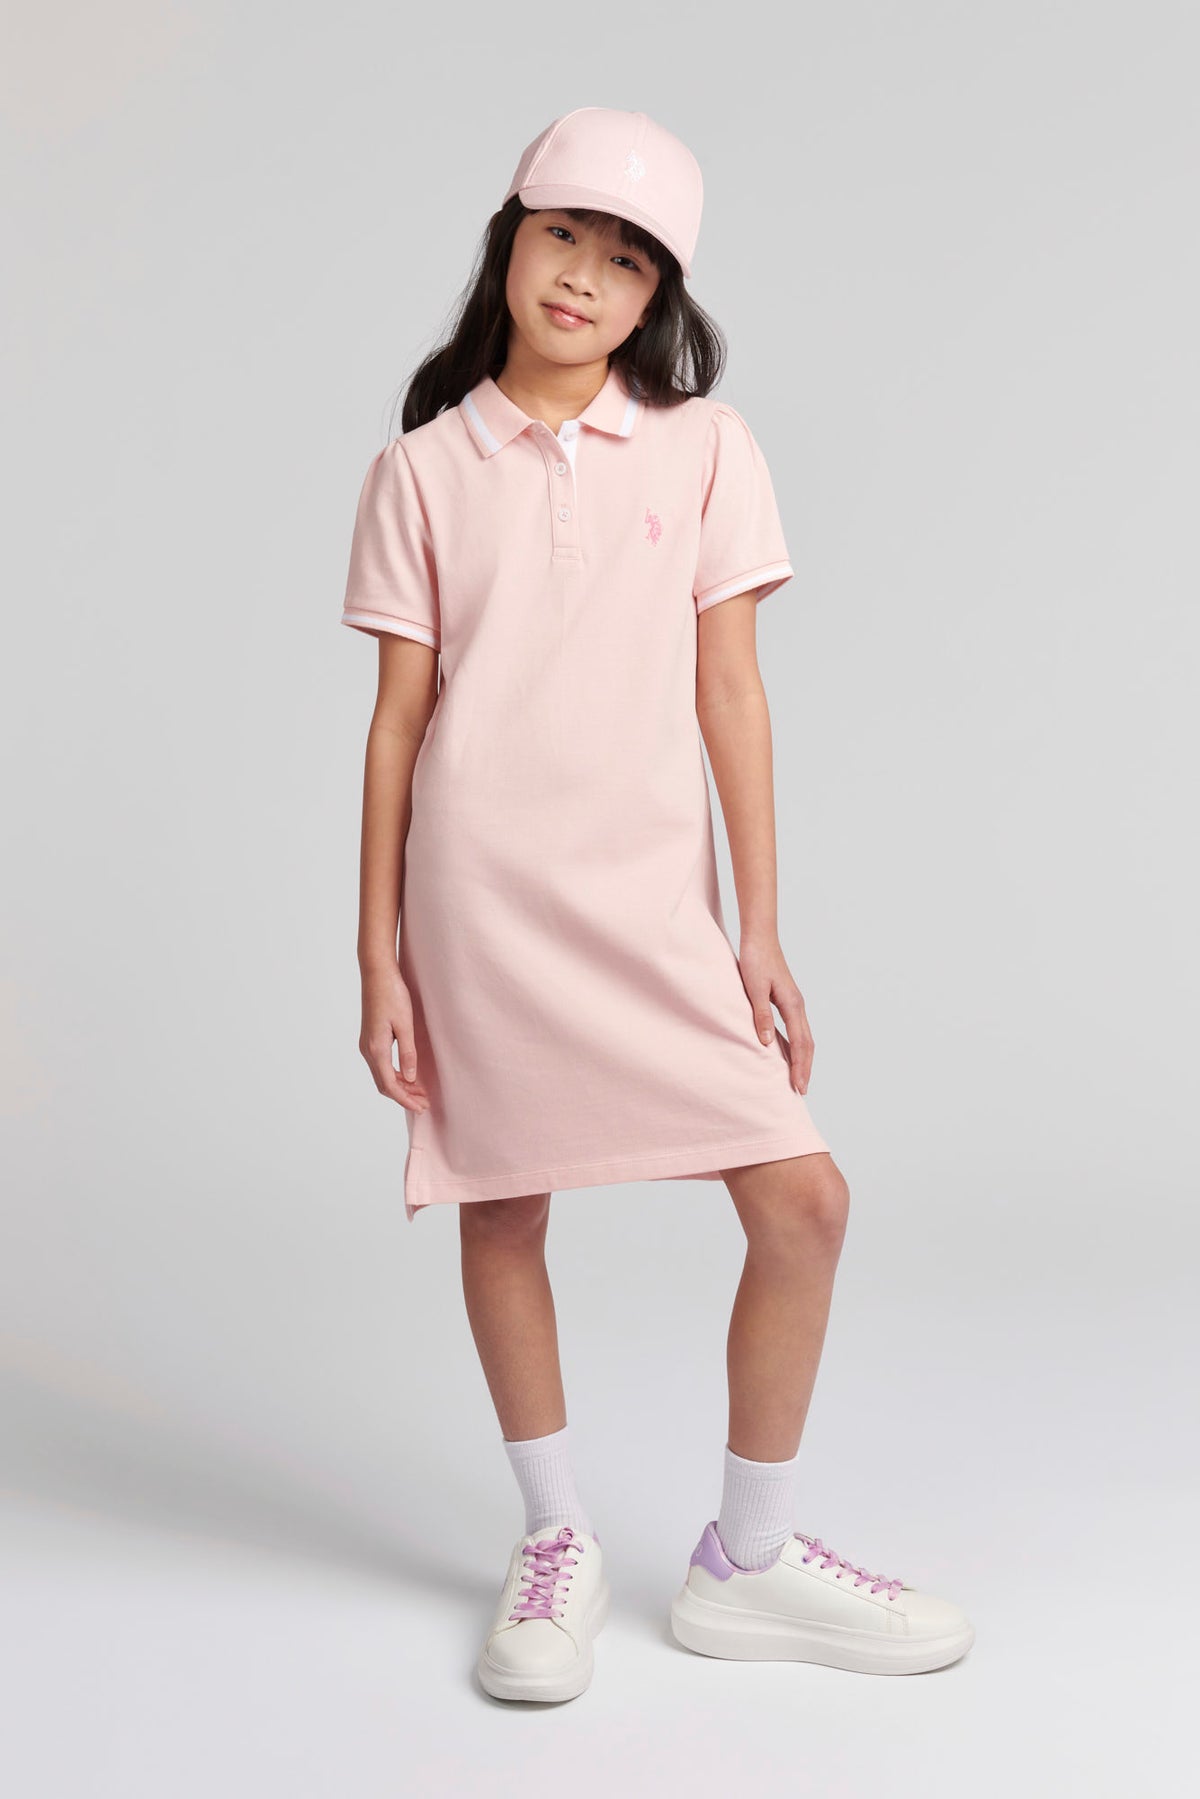 Girls Polo Dress in Crystal Rose